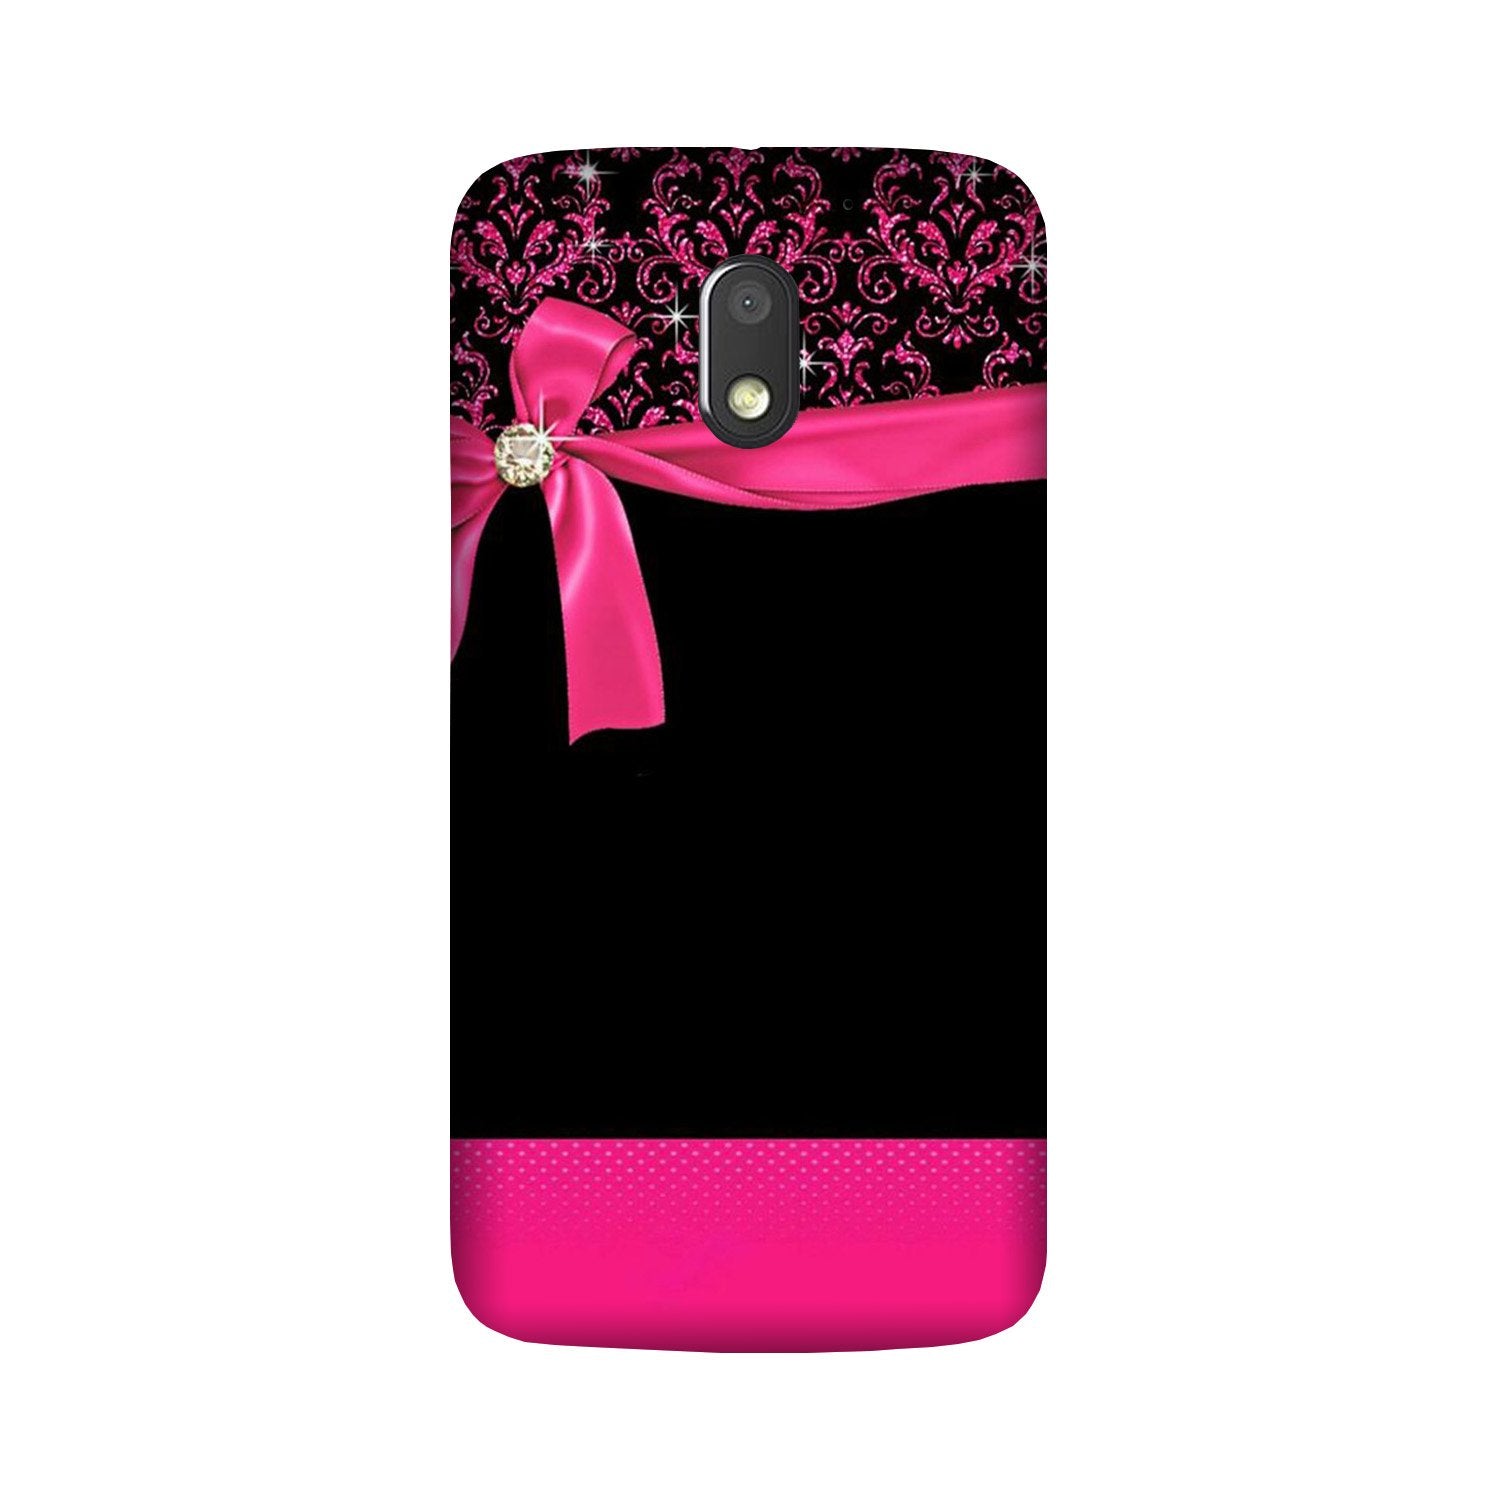 Gift Wrap4 Case for Moto G4 Play